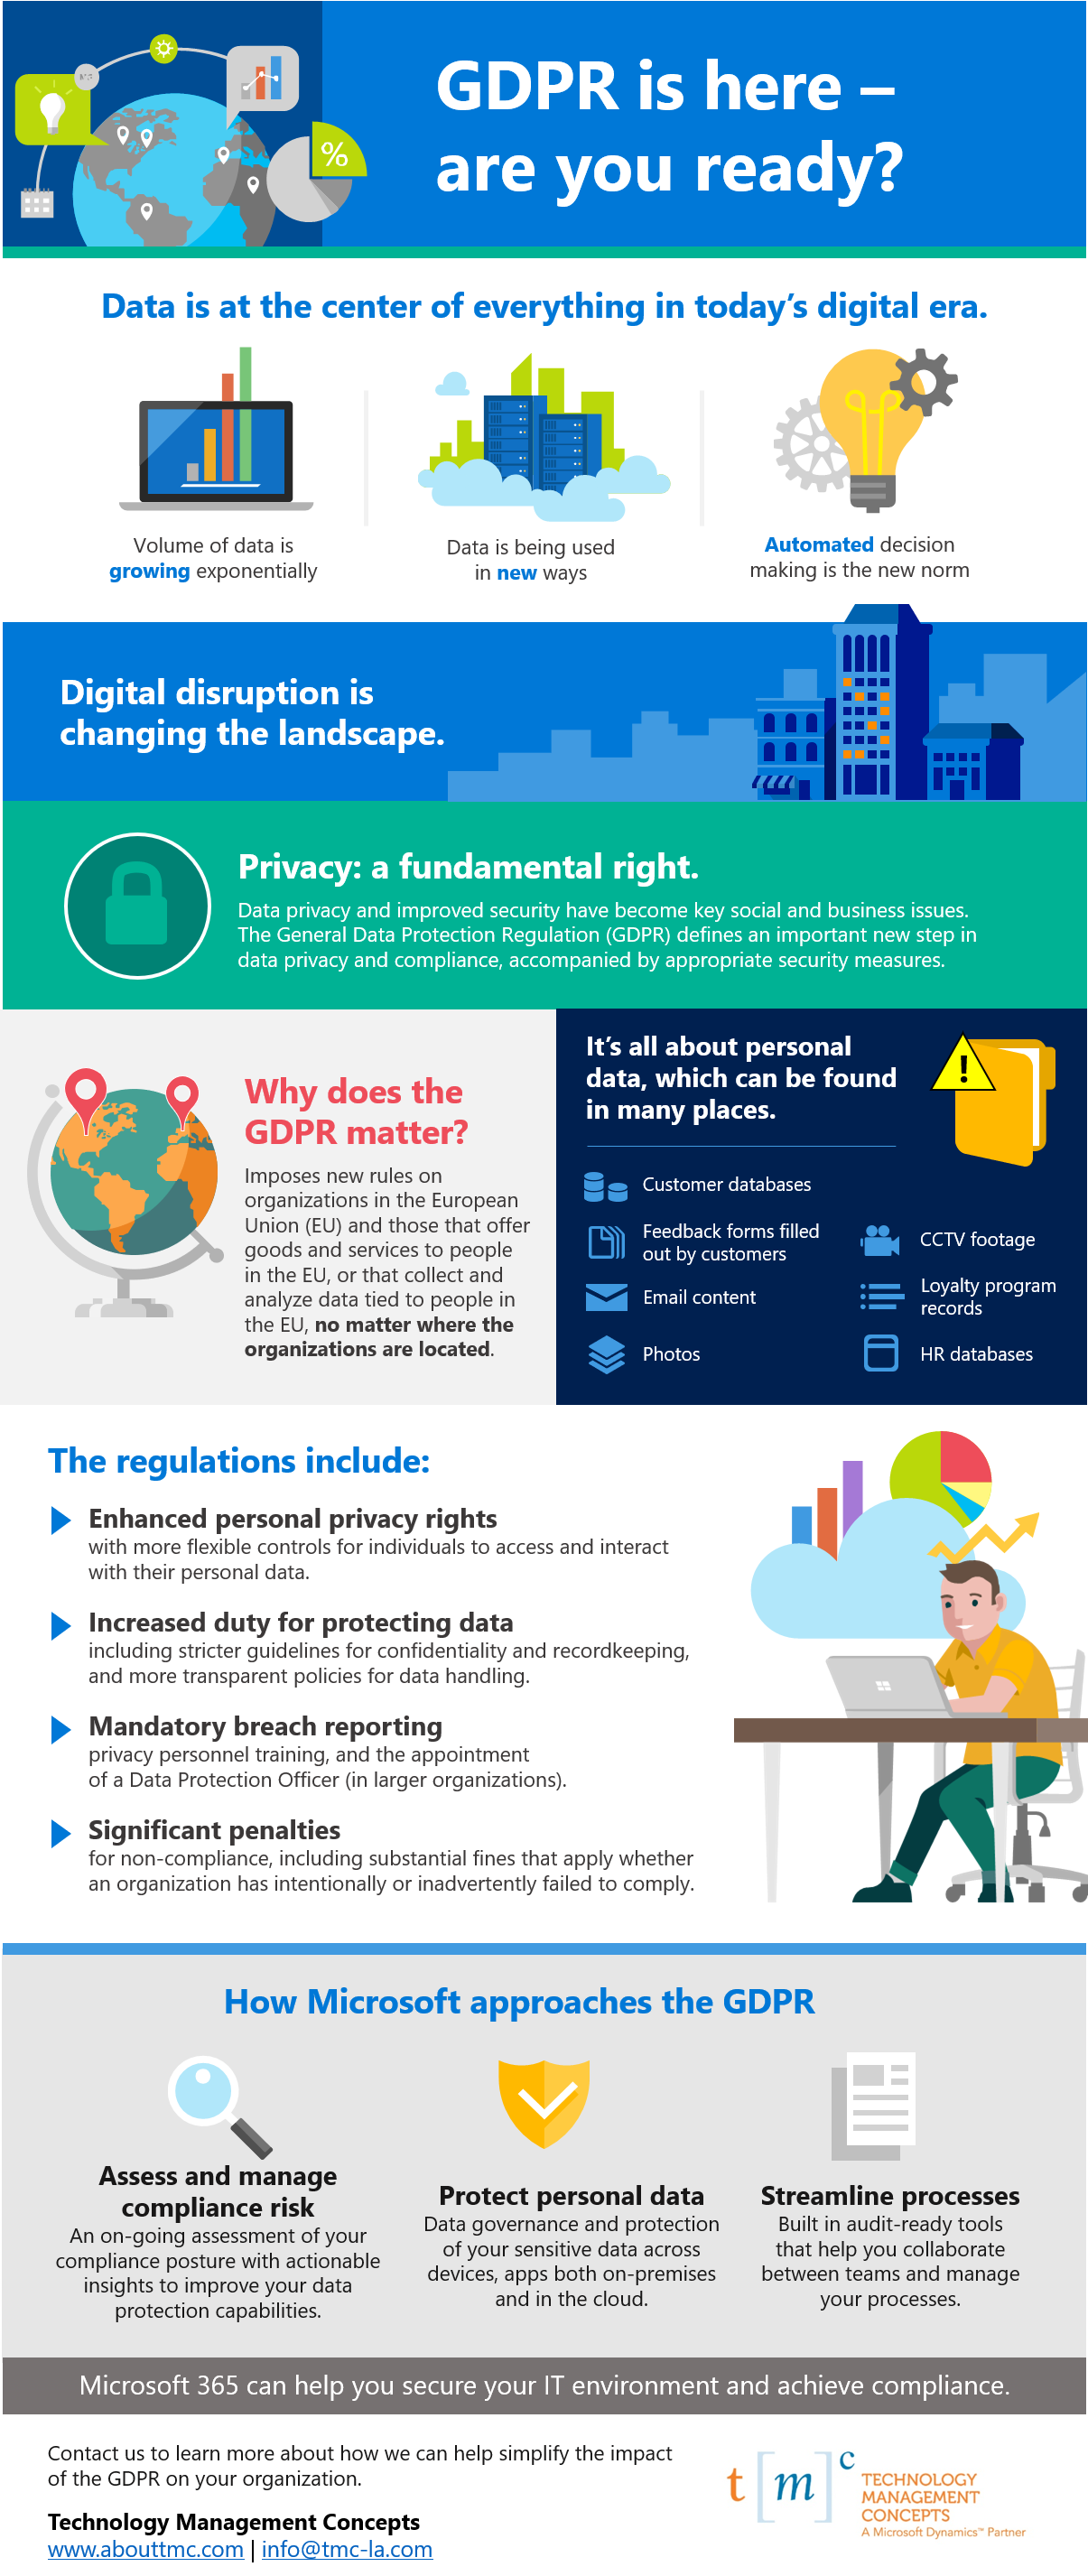 GDPR-is-here-Are-you-ready-Infographic-image